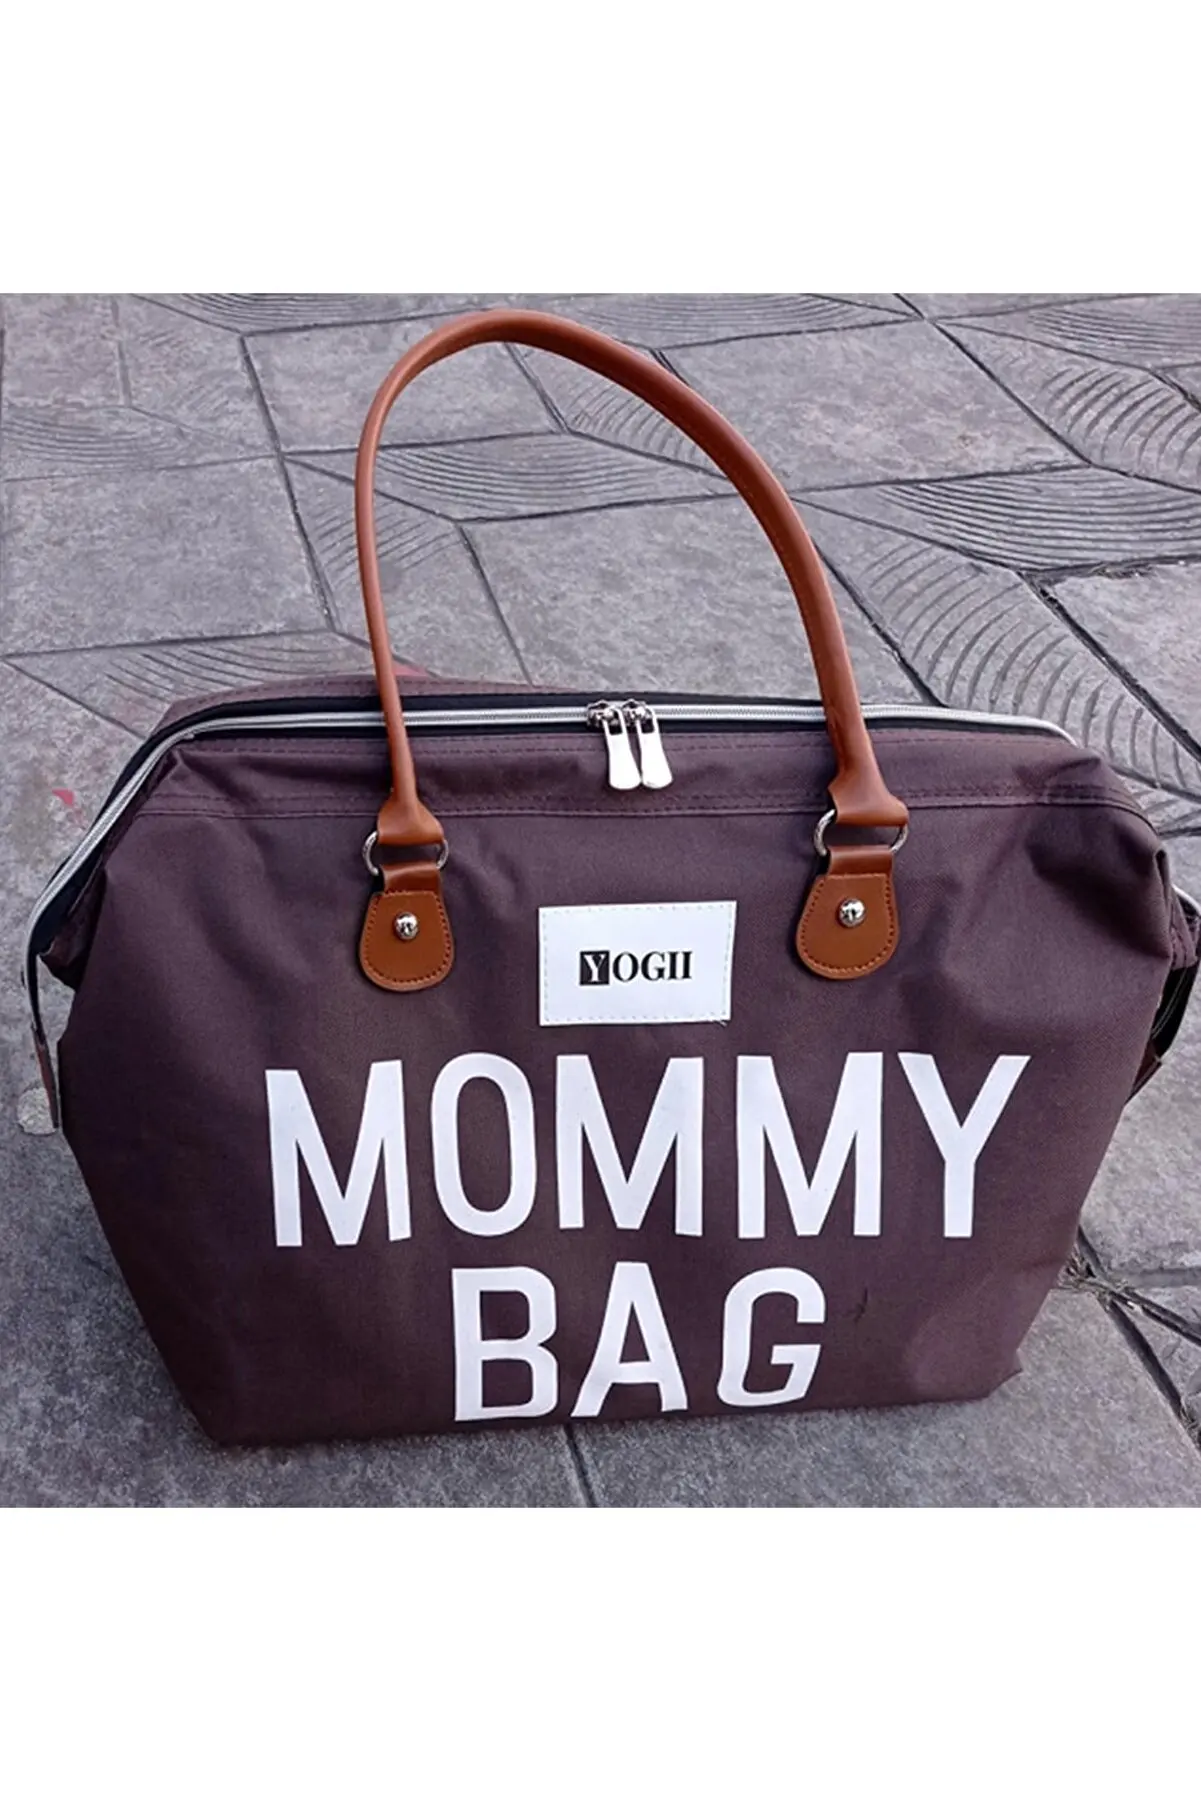 Mommy Bag Mother Baby Care Bag Big size Thermos Baby Bottle